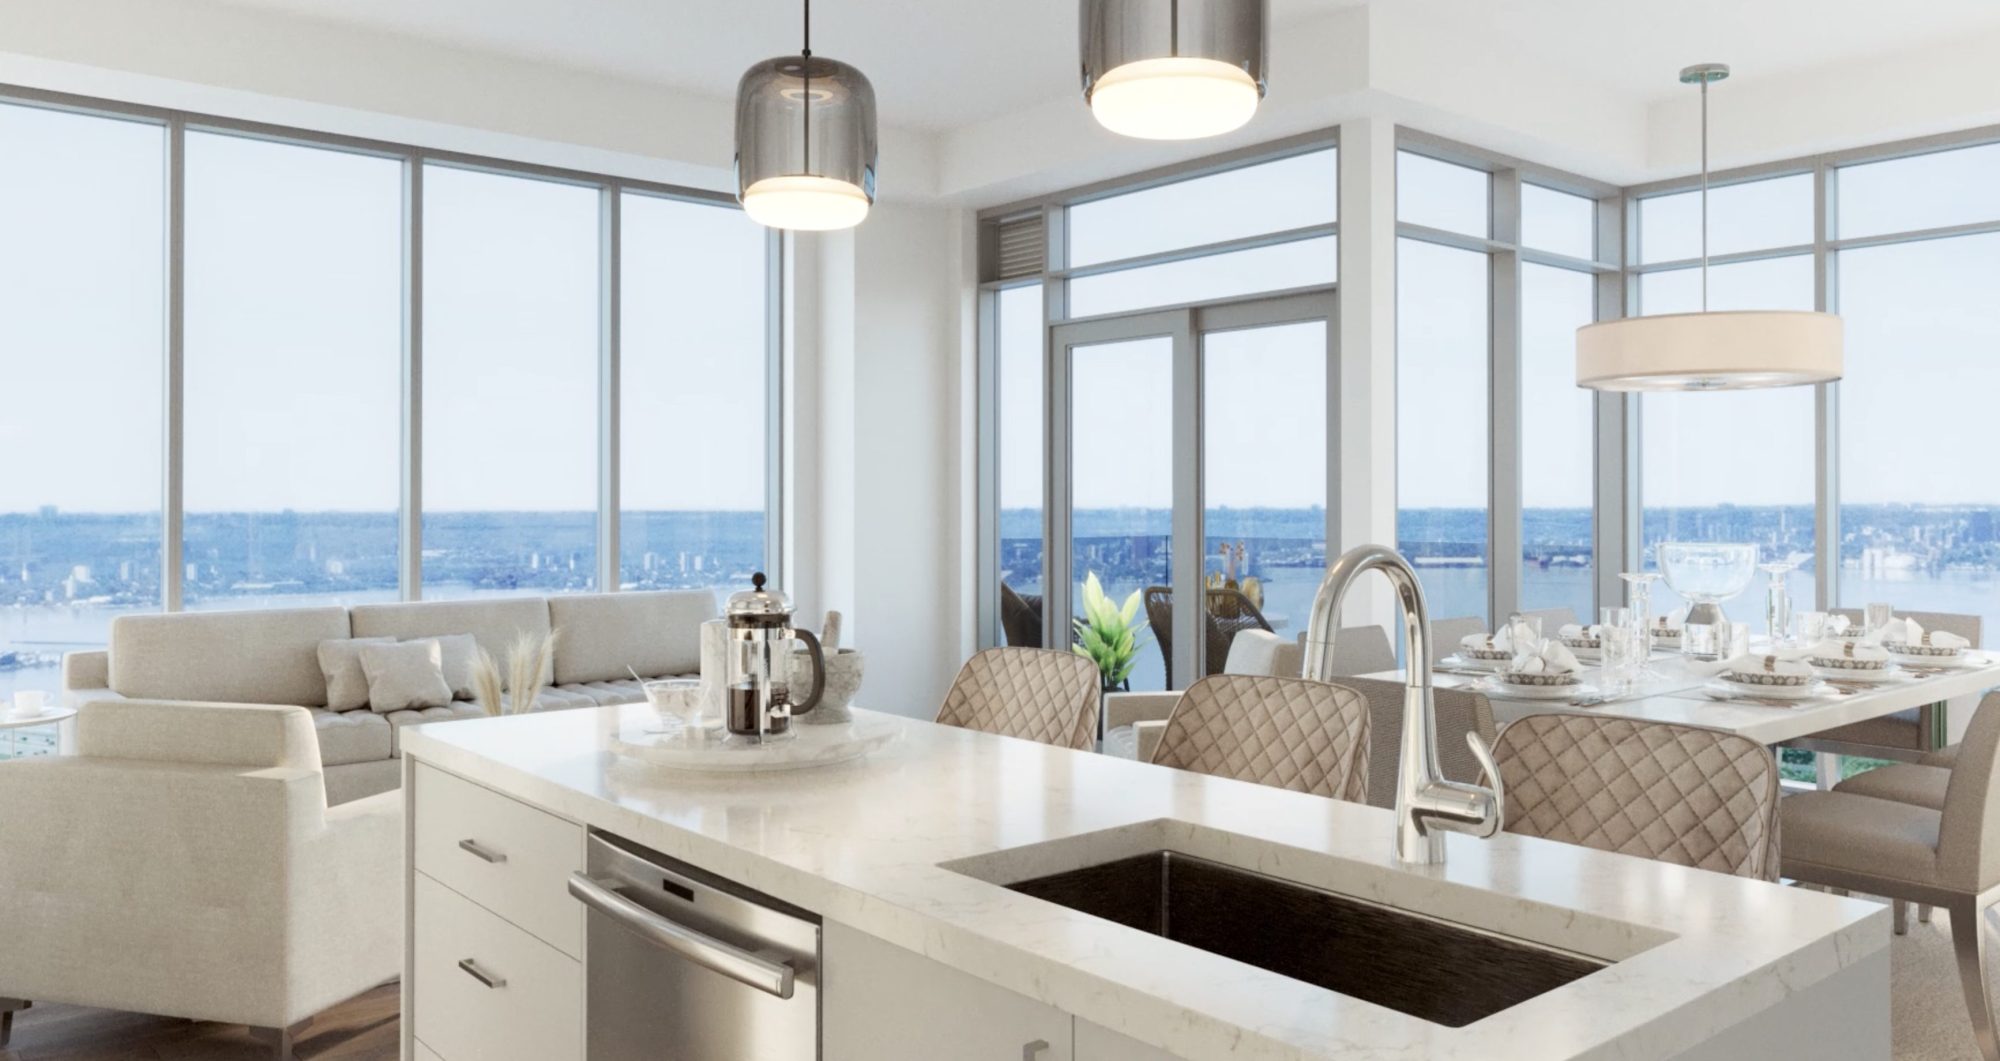 Renting Your Condo is Easier with Davies Condos